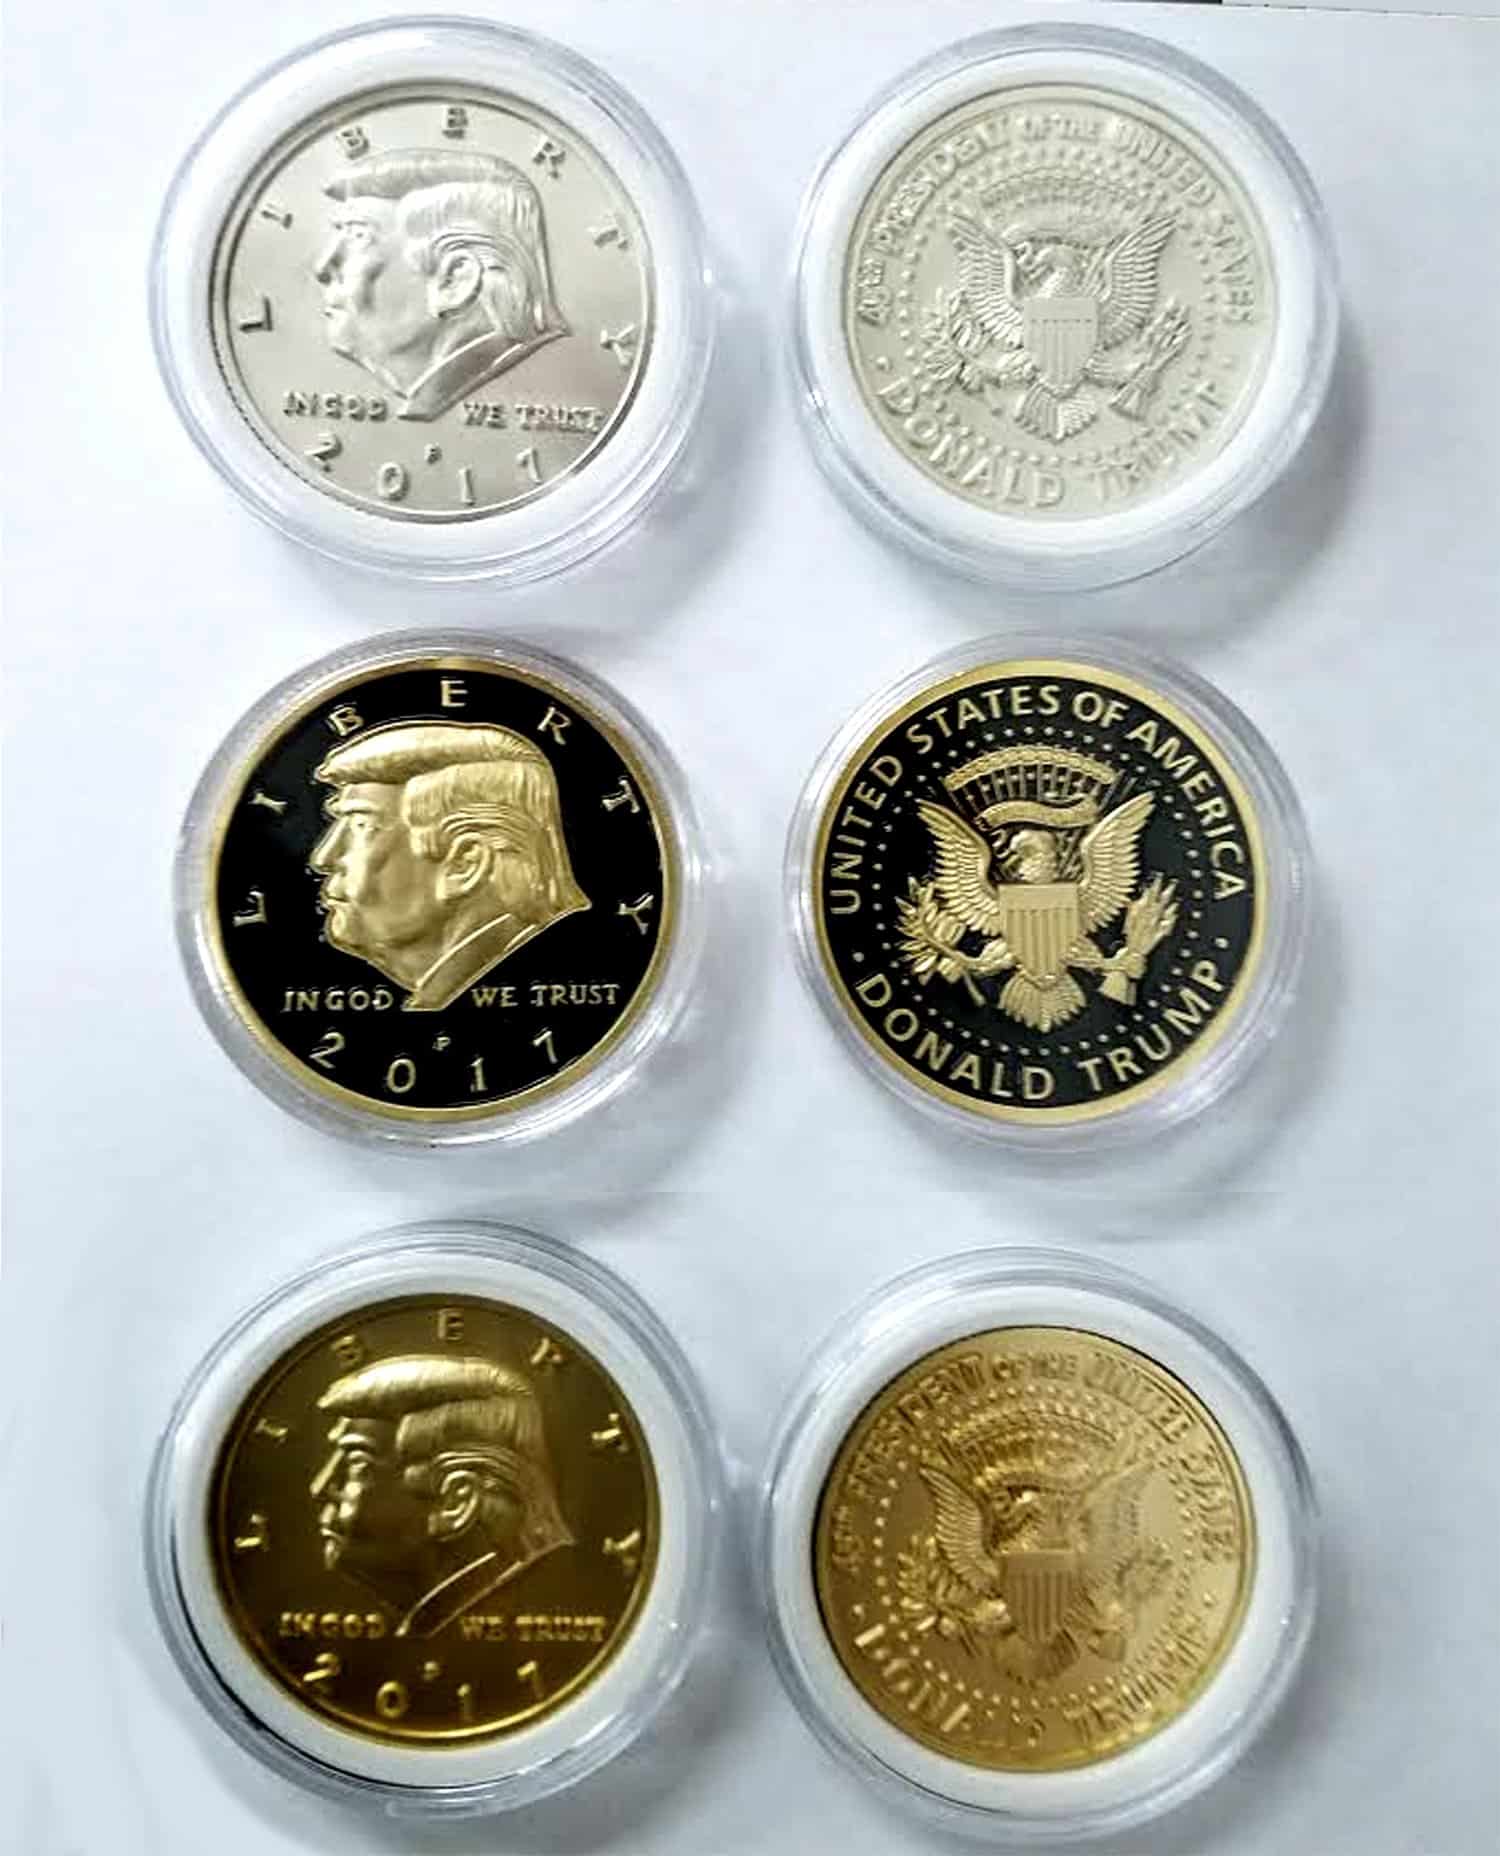 Buy Limited Edition Donald Trump 3 Coin Set